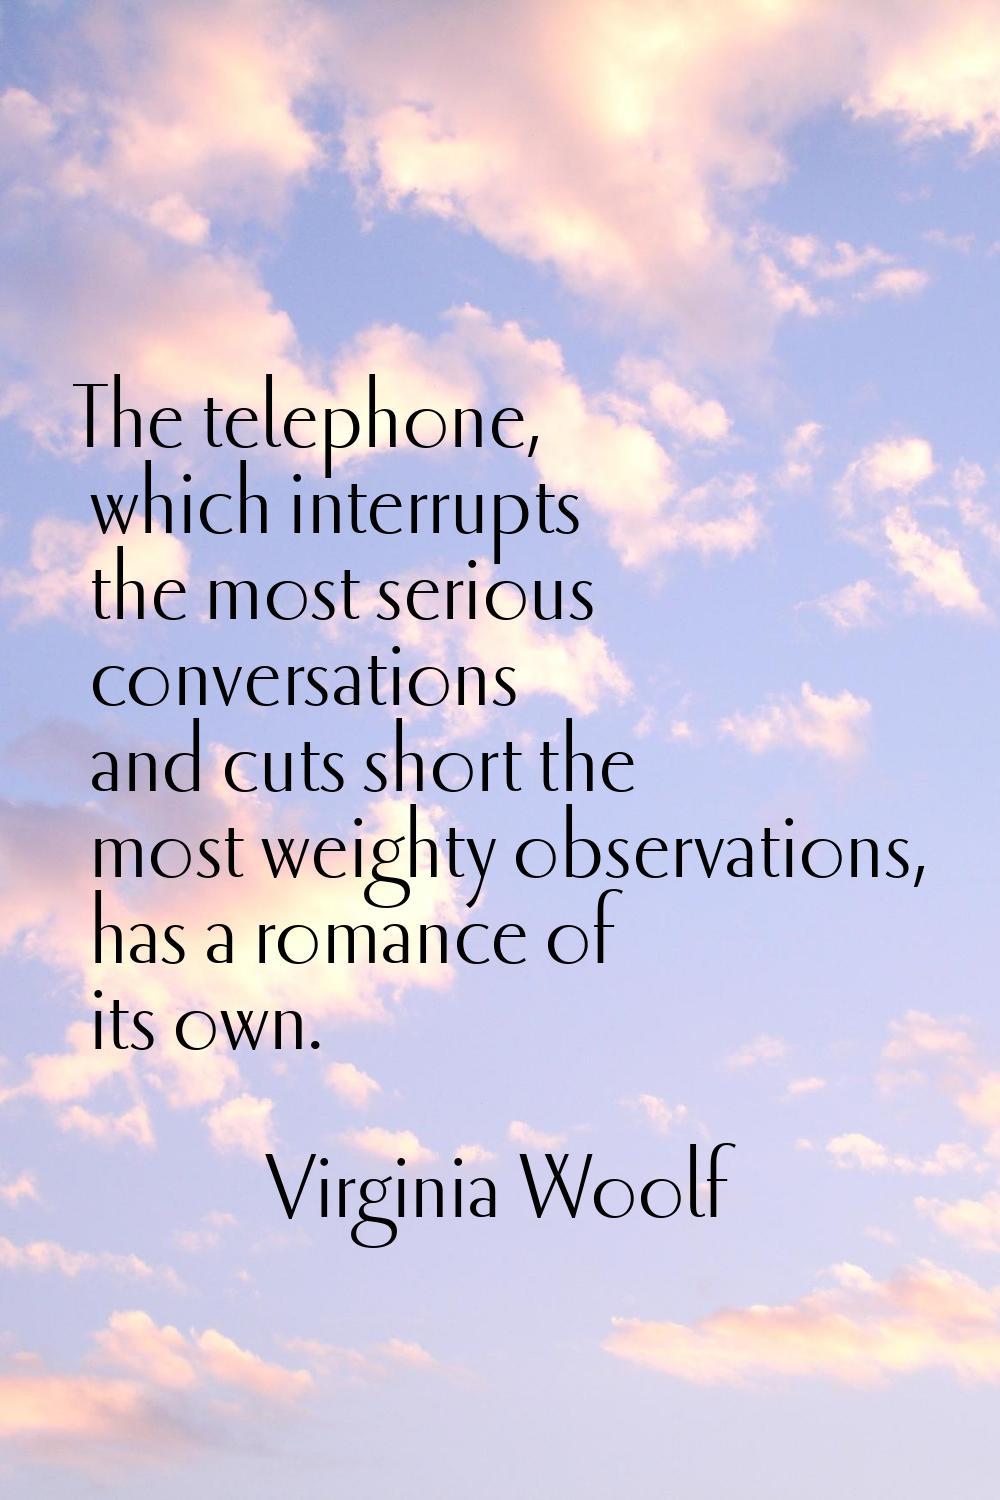 The telephone, which interrupts the most serious conversations and cuts short the most weighty obse